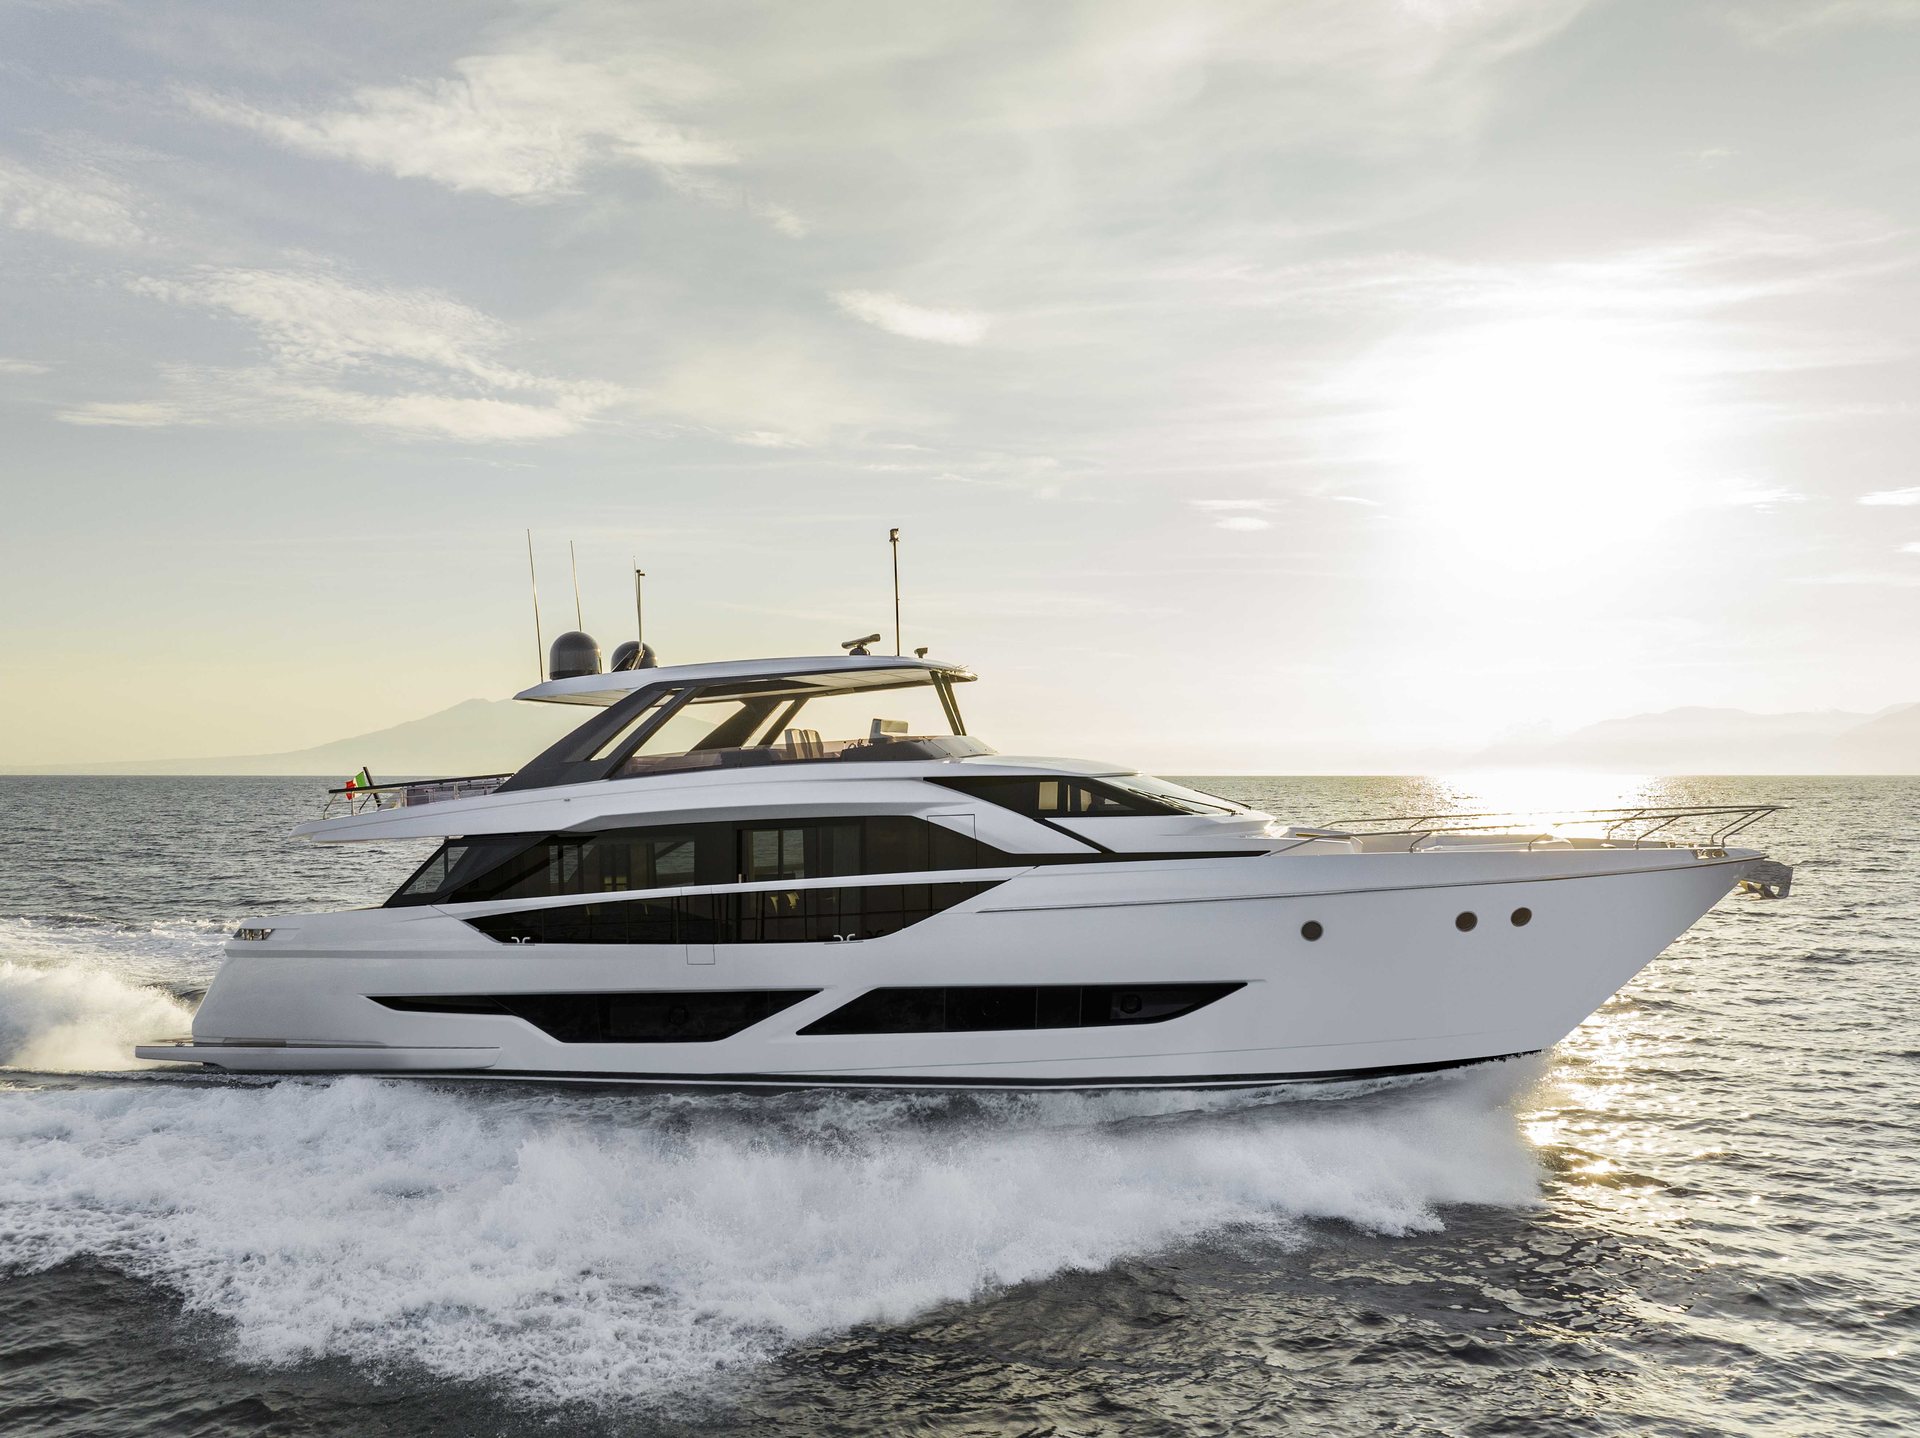 360 VR Virtual Tours of the Ferretti Yachts 860